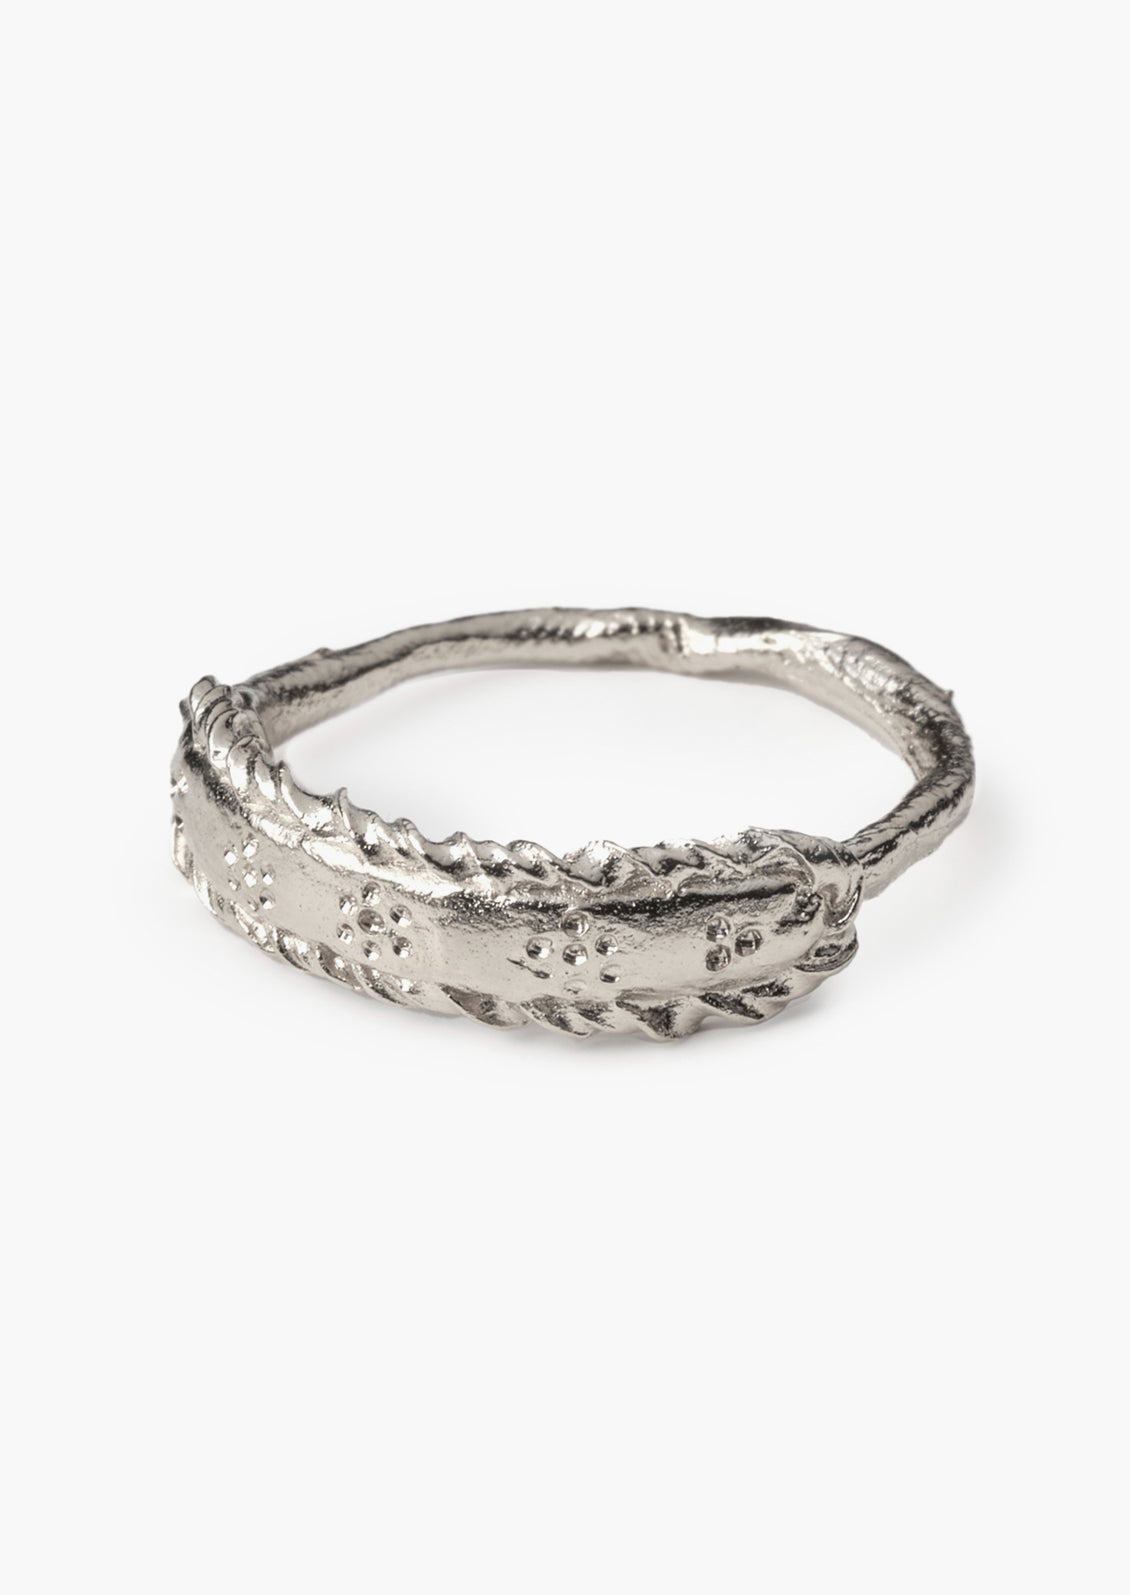 A silver ring with delicate floral etching.